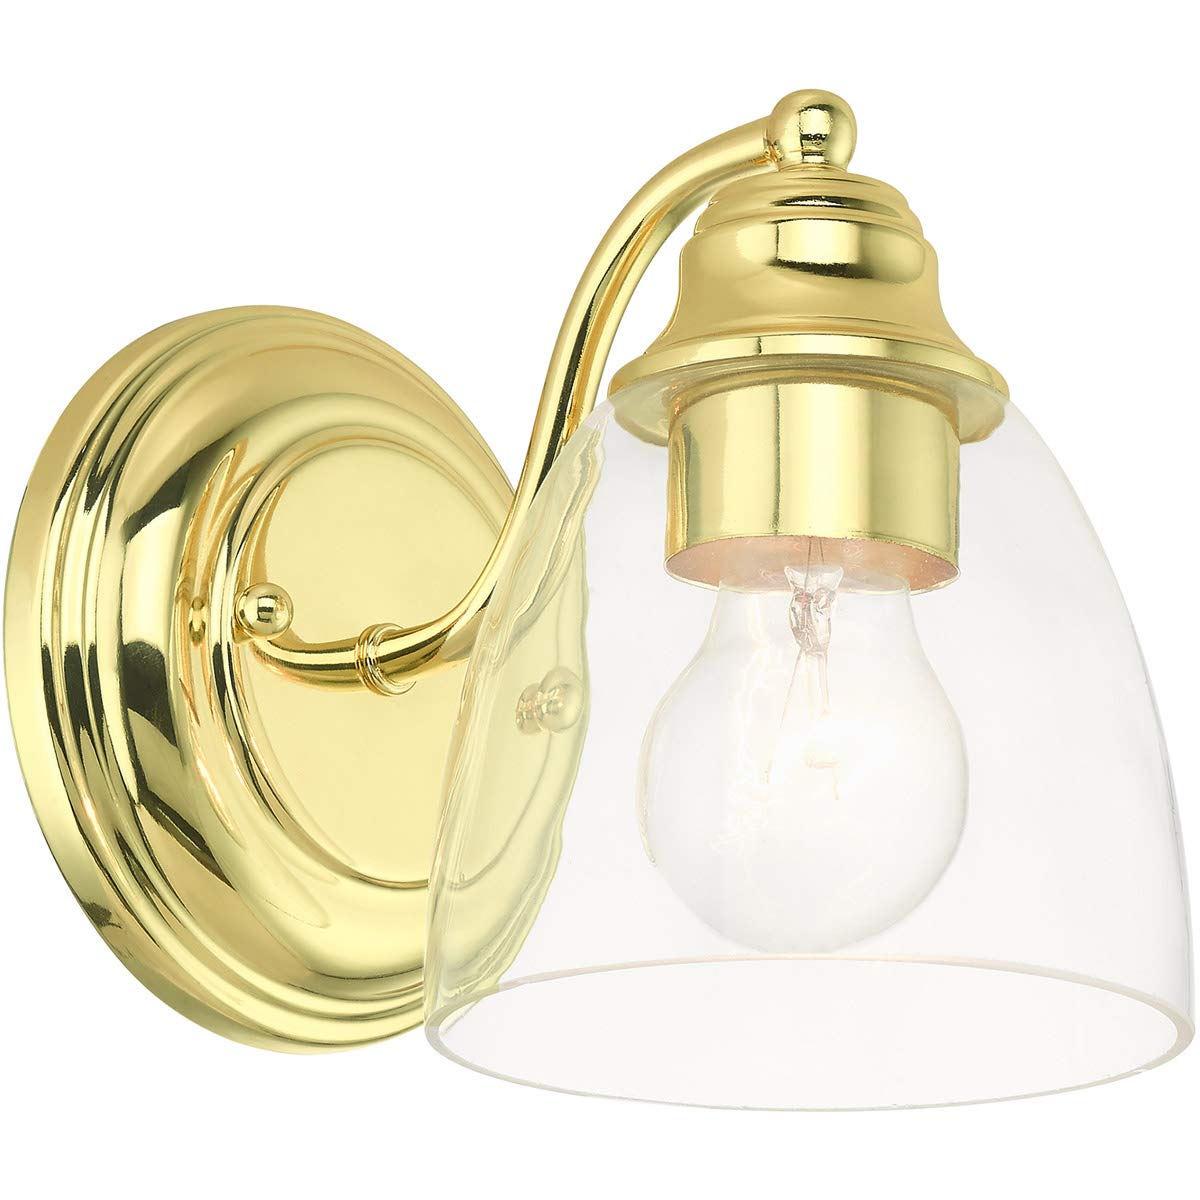 Livex Lighting 15131-02 Montgomery Collection 1-Light Bathroom Vanity Light with Clear Glass, Polished Brass, 5.38 x 7